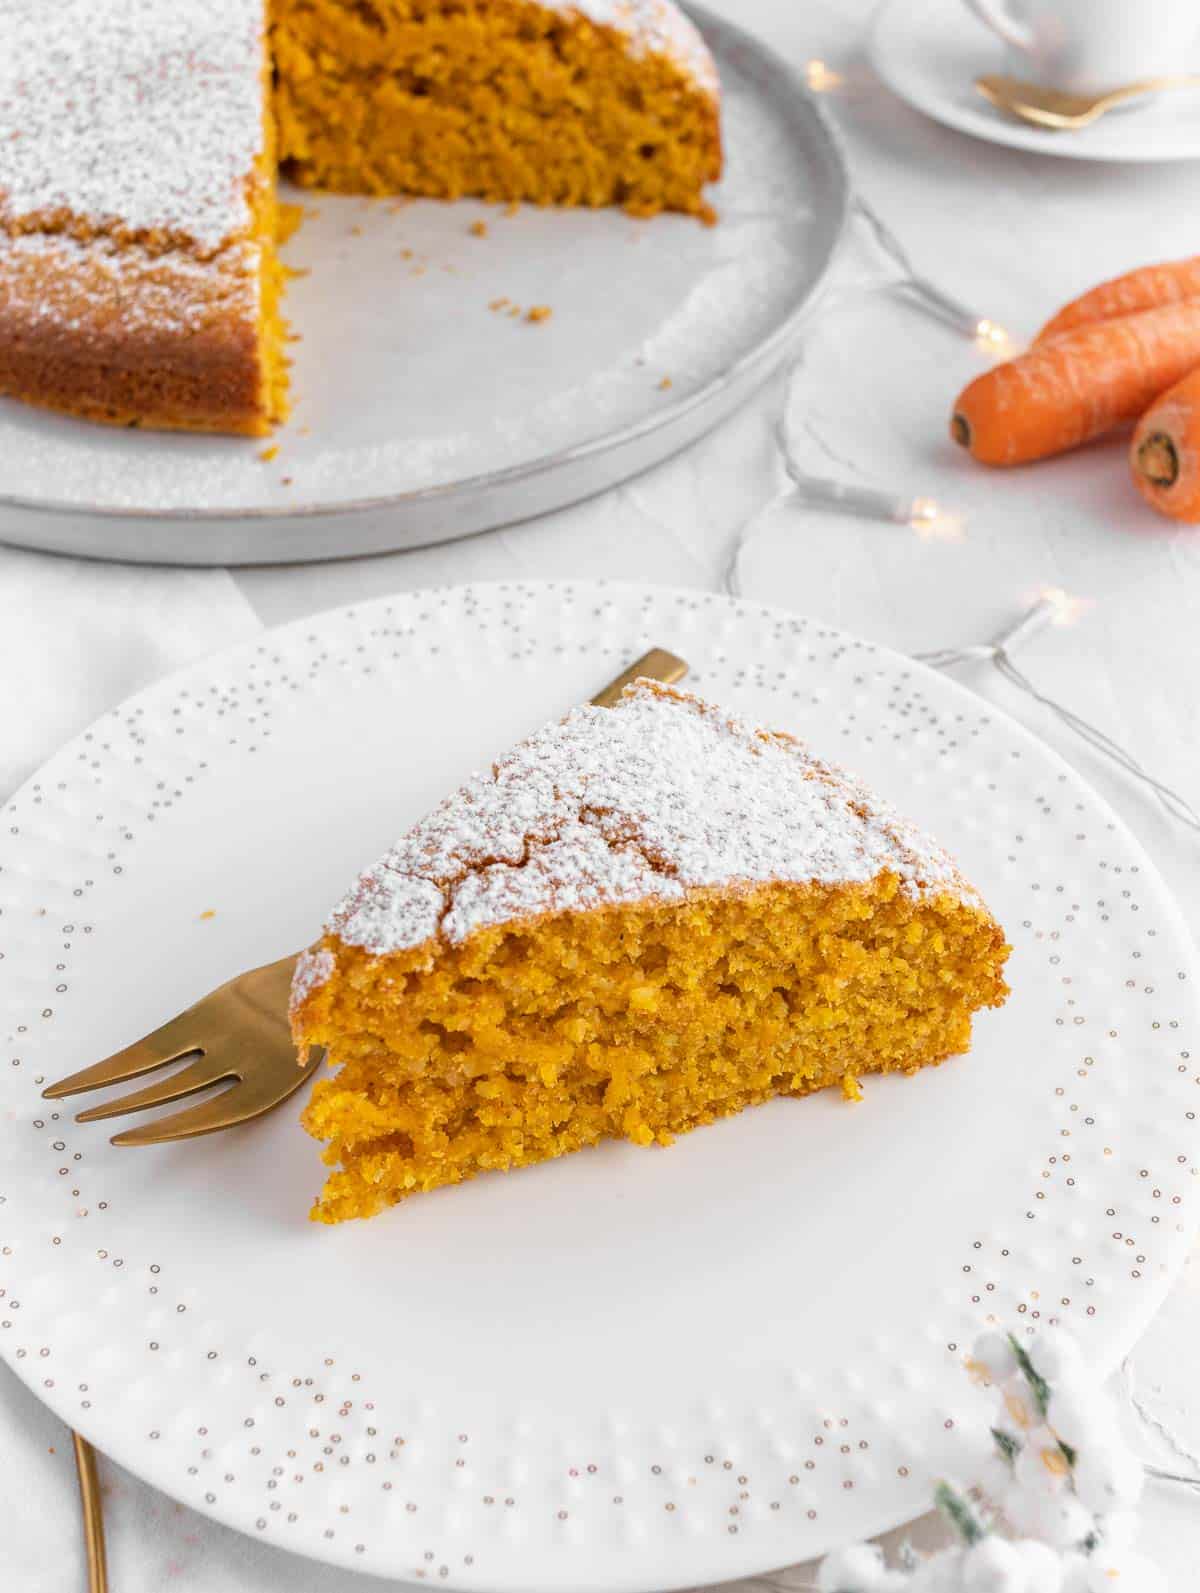 a slice of carrot and orange cake